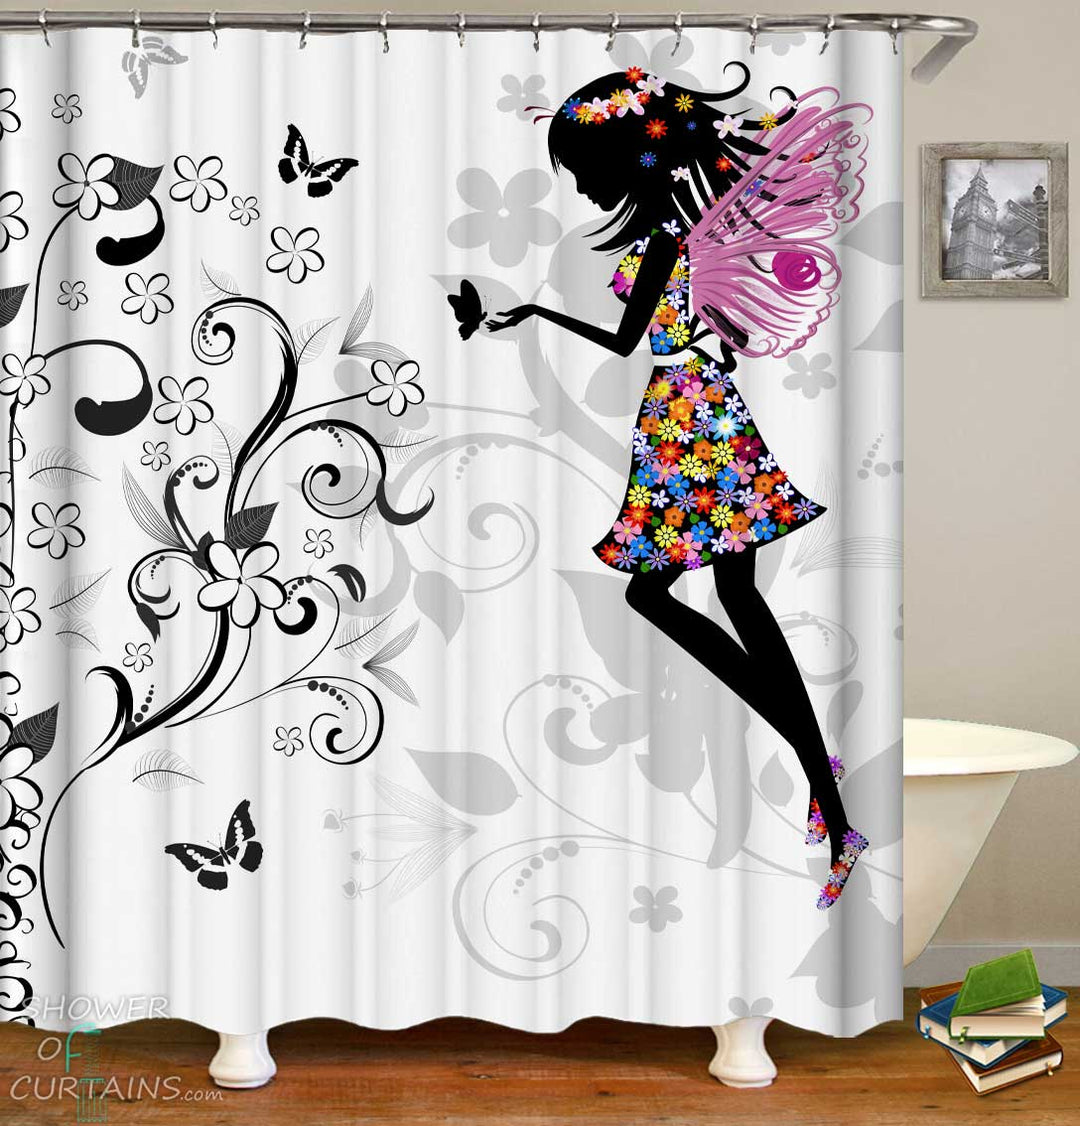 Shower Curtains with Fairy of Flowers and Butterflies